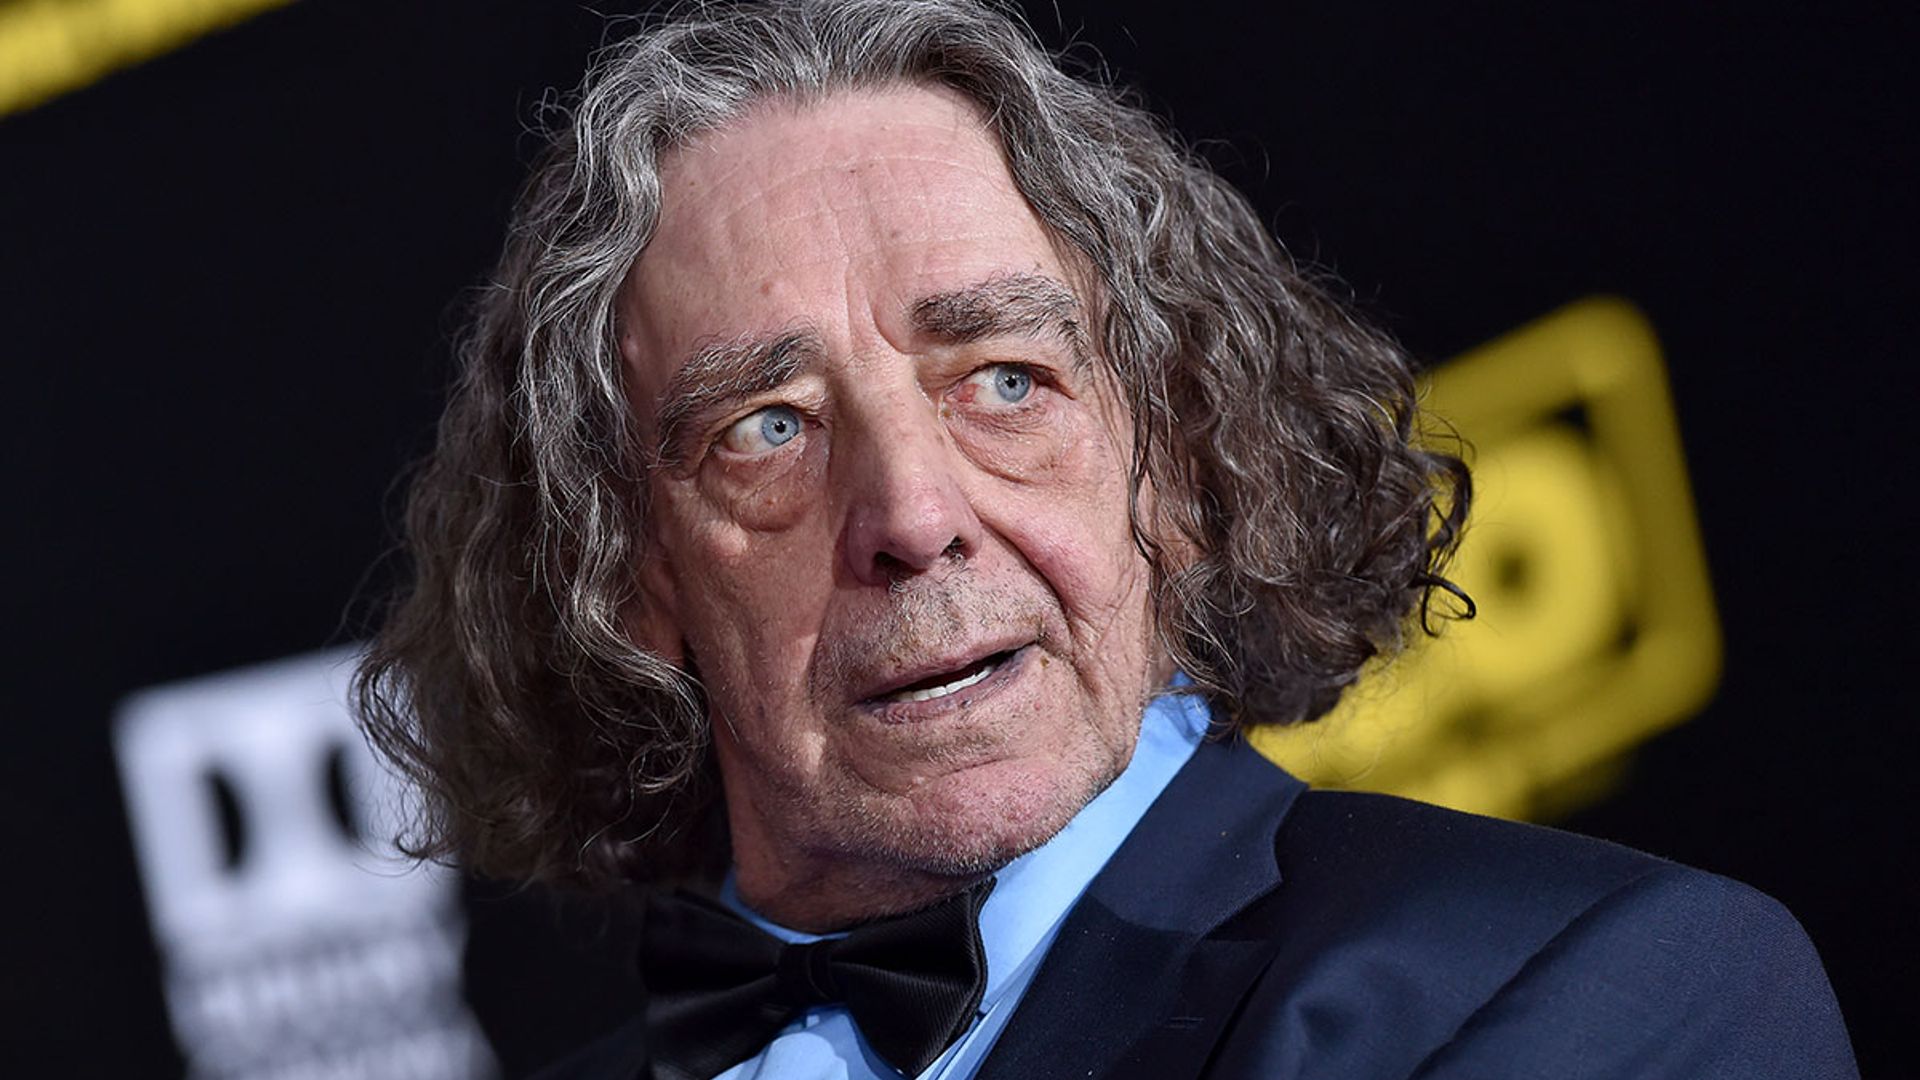 Star Wars star Peter Mayhew, who played Chewbacca, dies aged 74